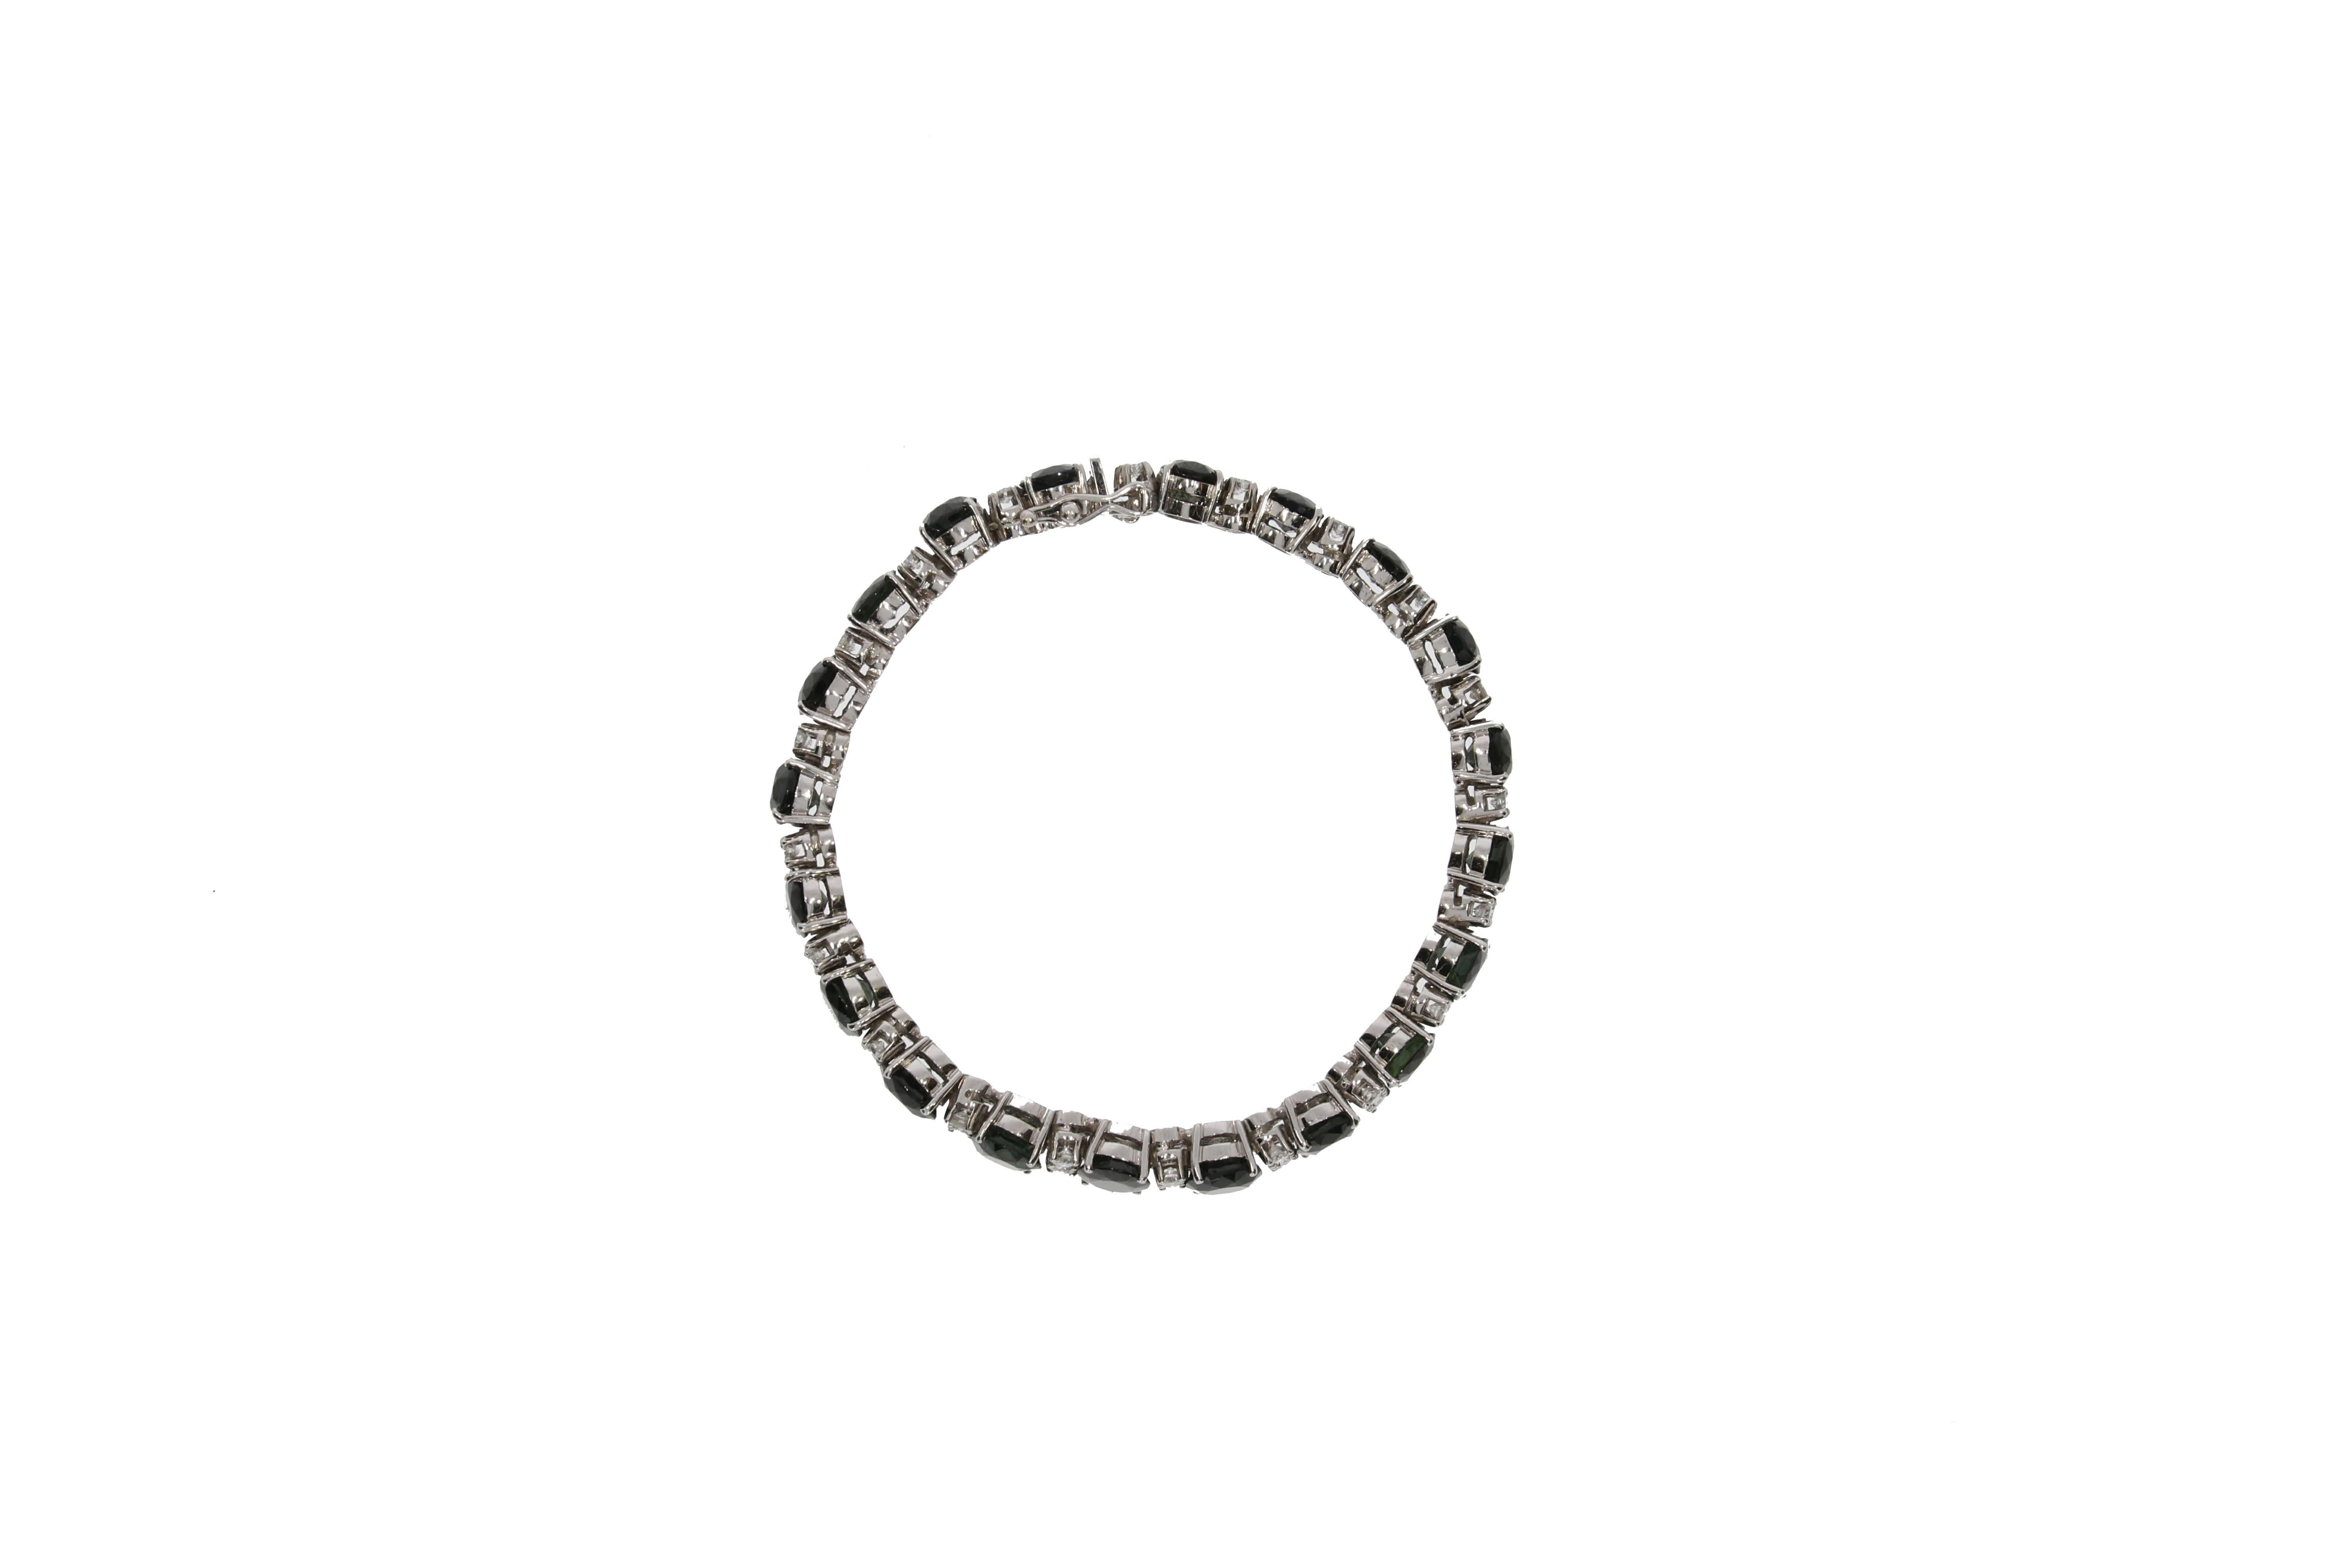 A classic yet modern white gold and rodium plated bracelet. Designed as a gently graduated line of 40 brilliant-cut diamonds (in total approx.: 2,5 carats) and 20 oval facetted black sapphires (in total approx.: 35 carats). The stones are prawn set.